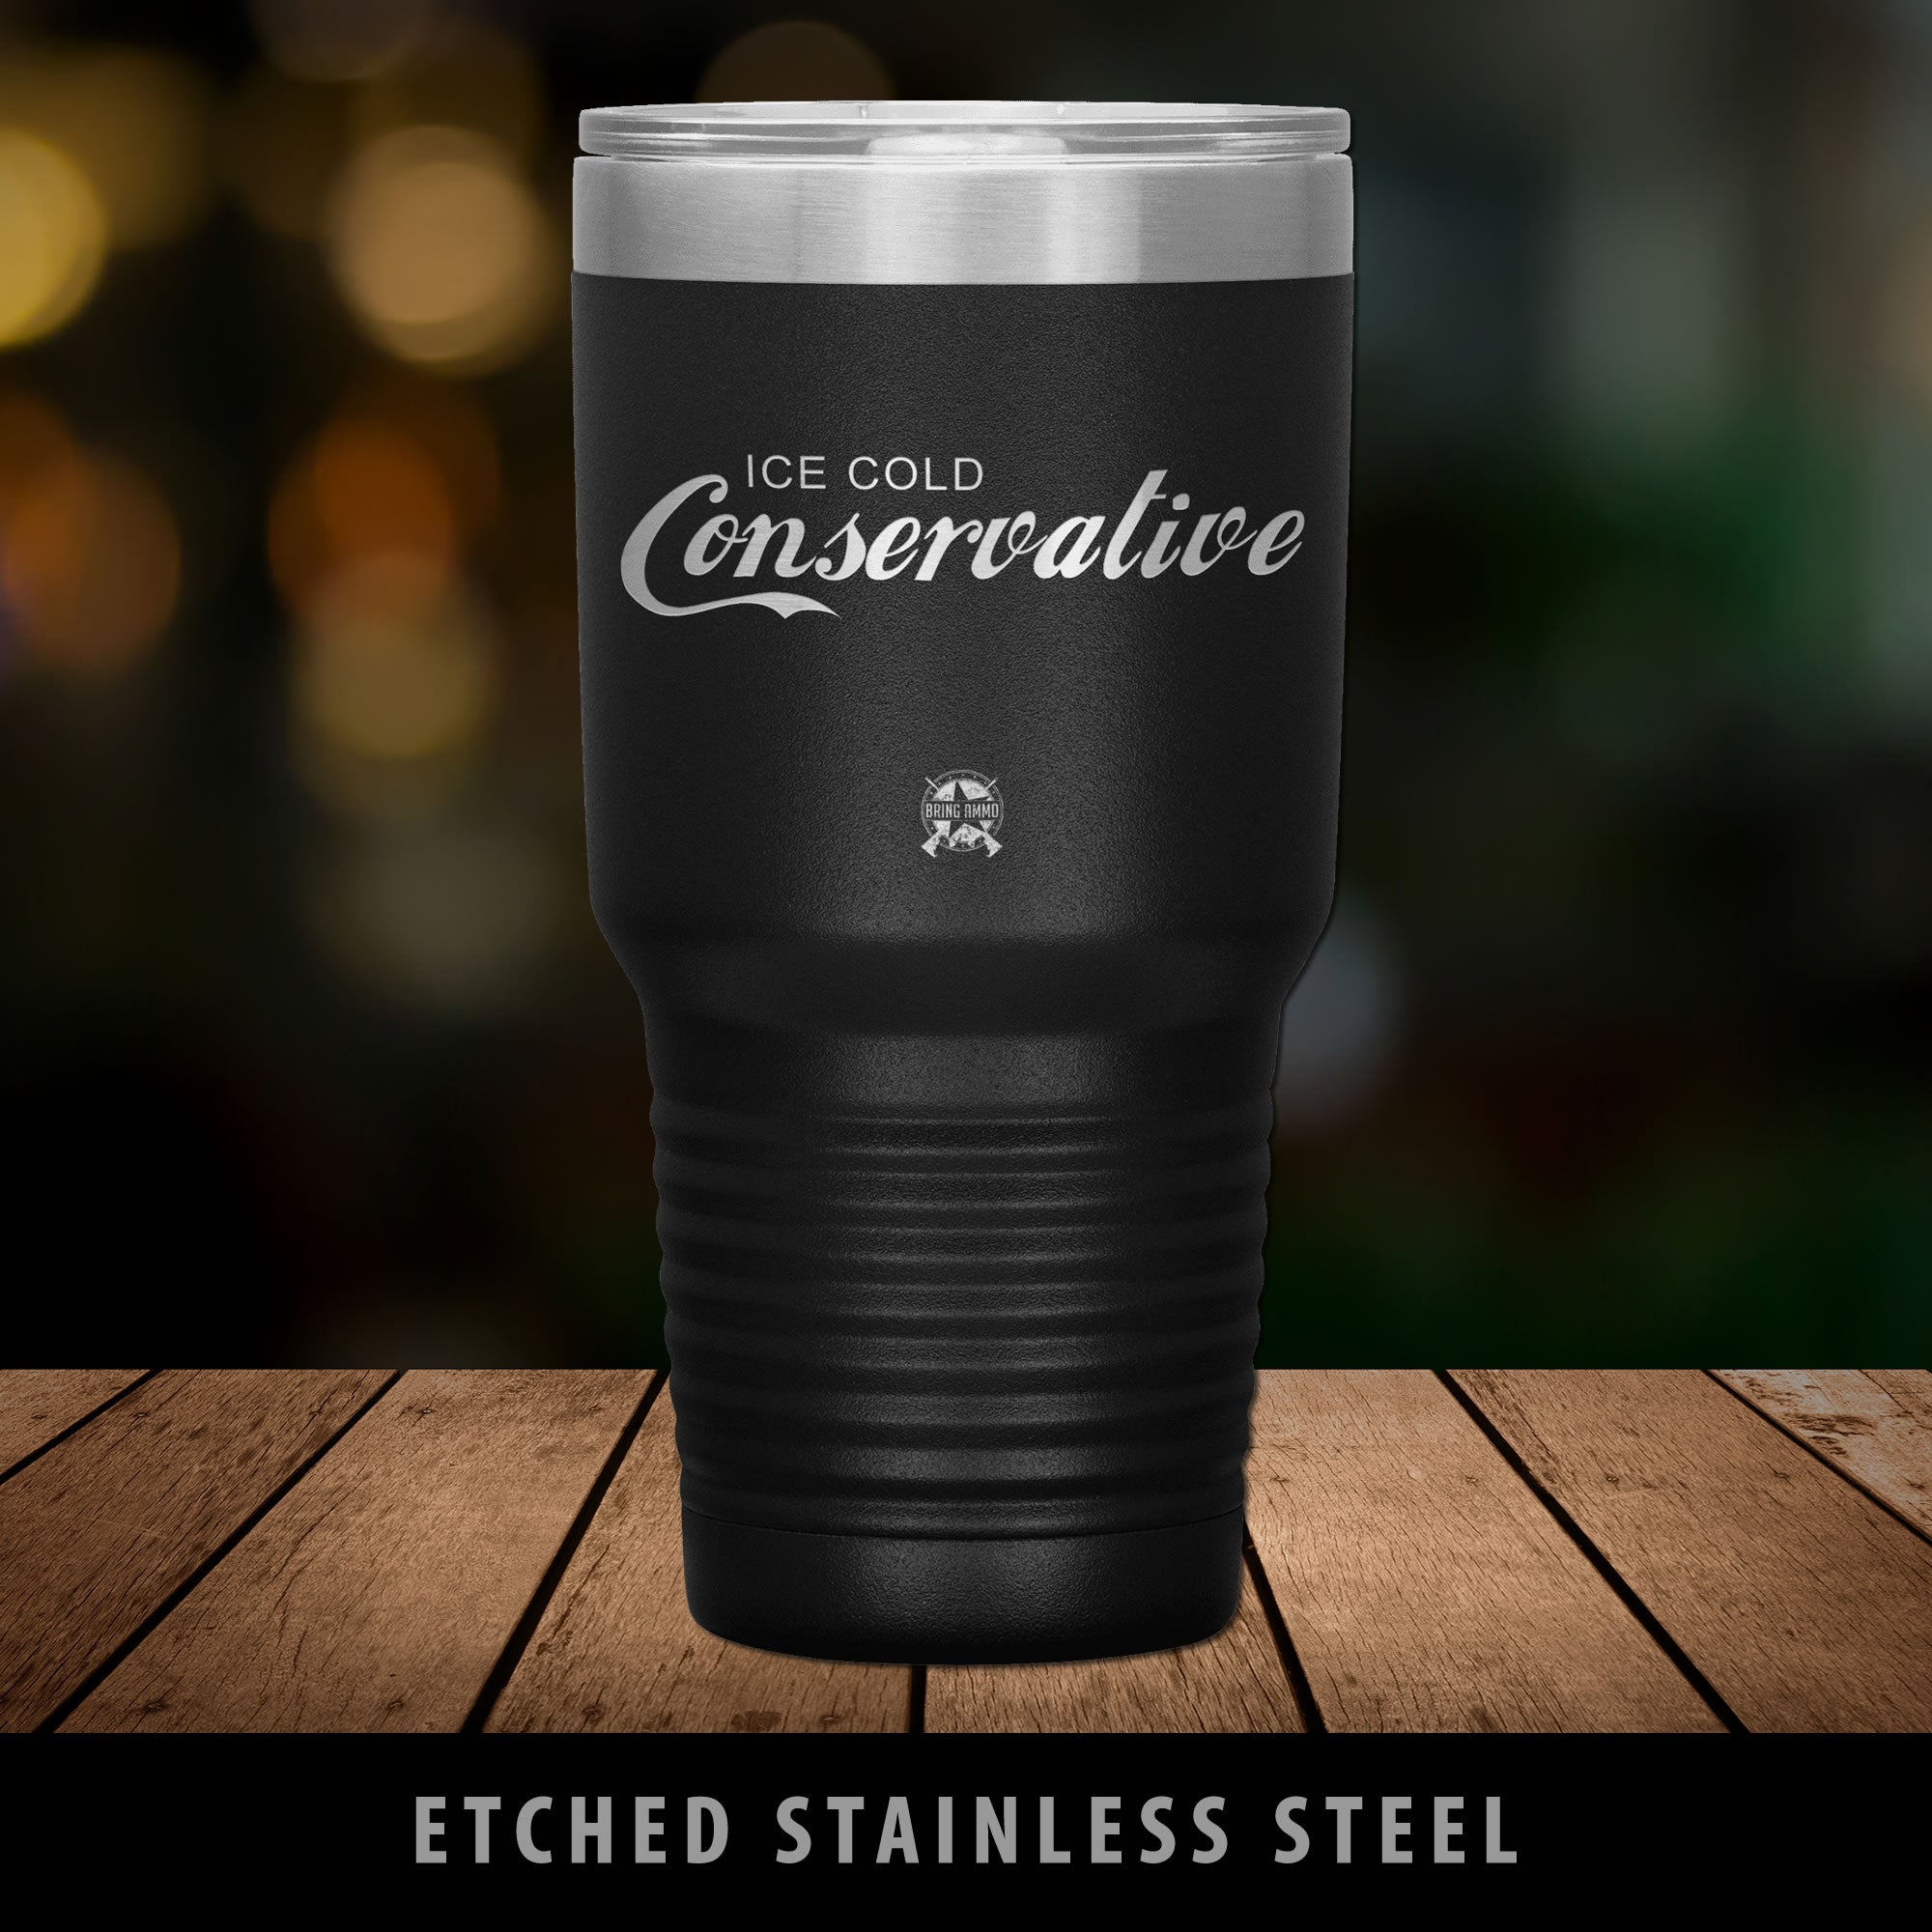 "Ice Cold Conservative" Premium Stainless Steel Etched Tumbler Parody Tumblers Black 